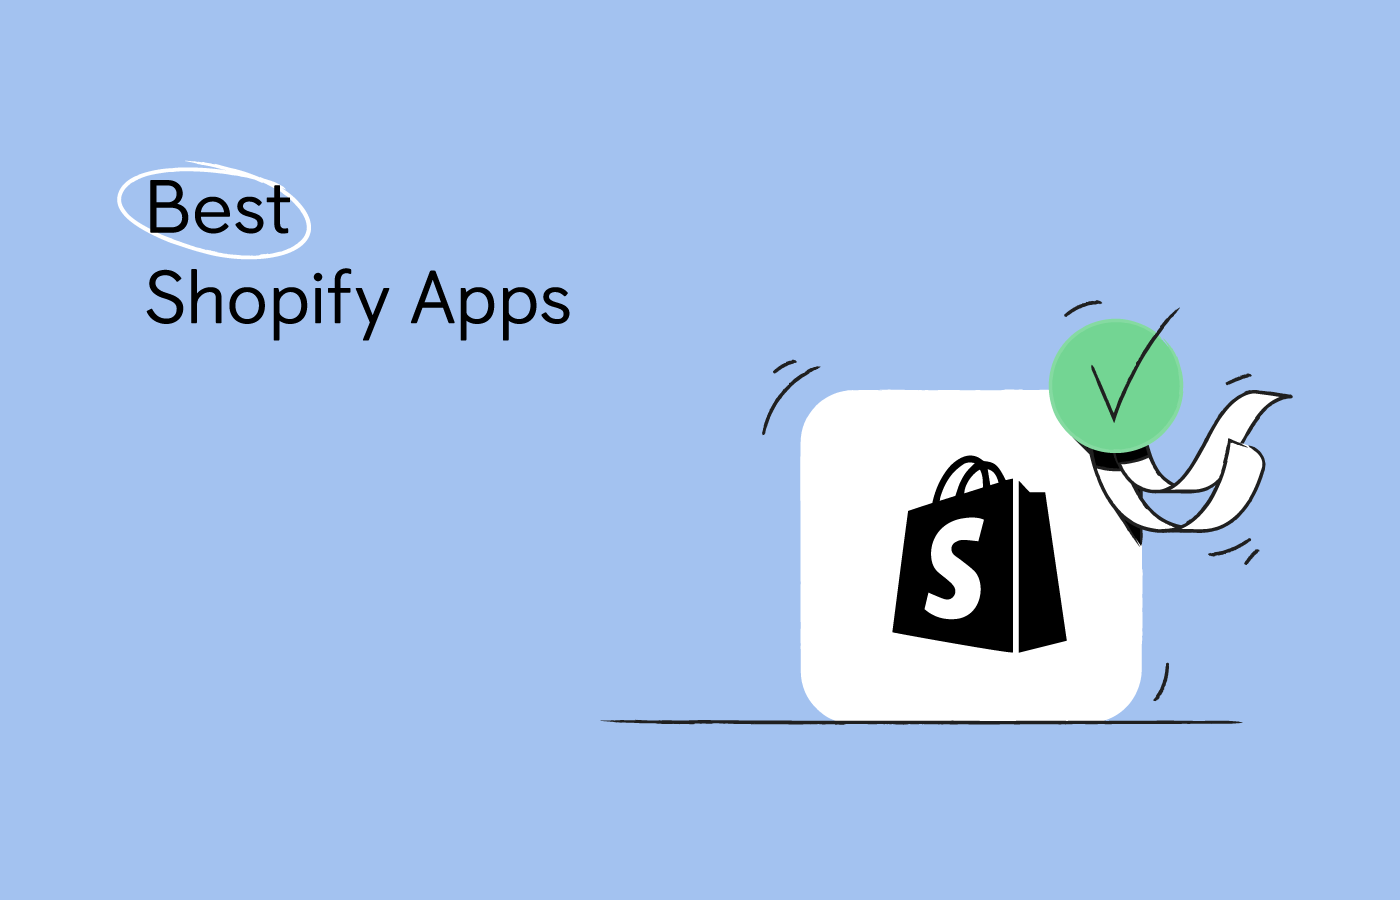 Best Shopify Apps to Increase Sales in 2022